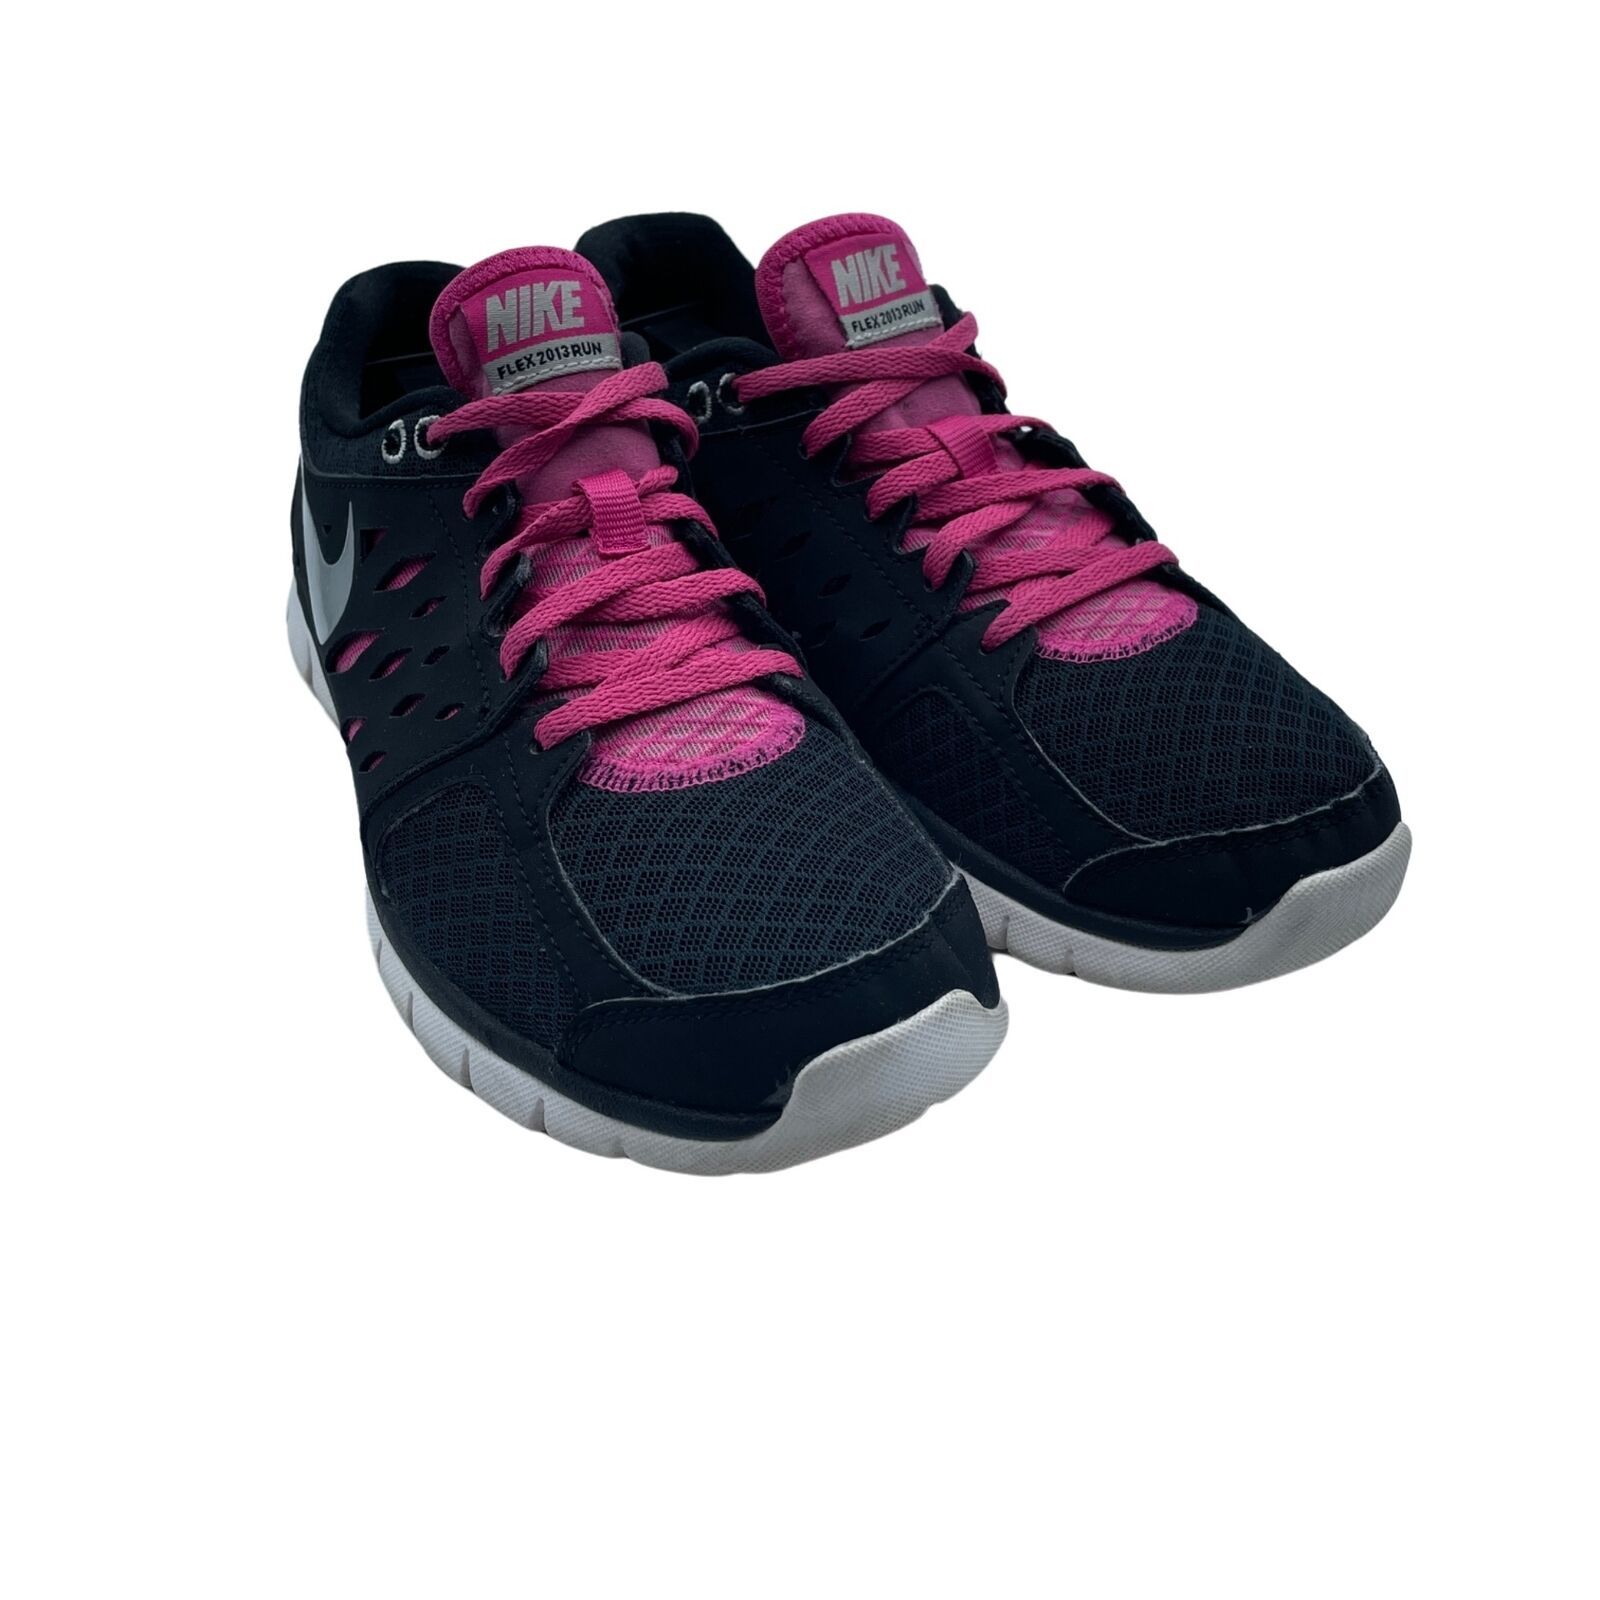 Primary image for Nike Flex 2013 Trainers Running Shoes Pink Black Womens Size 7.5